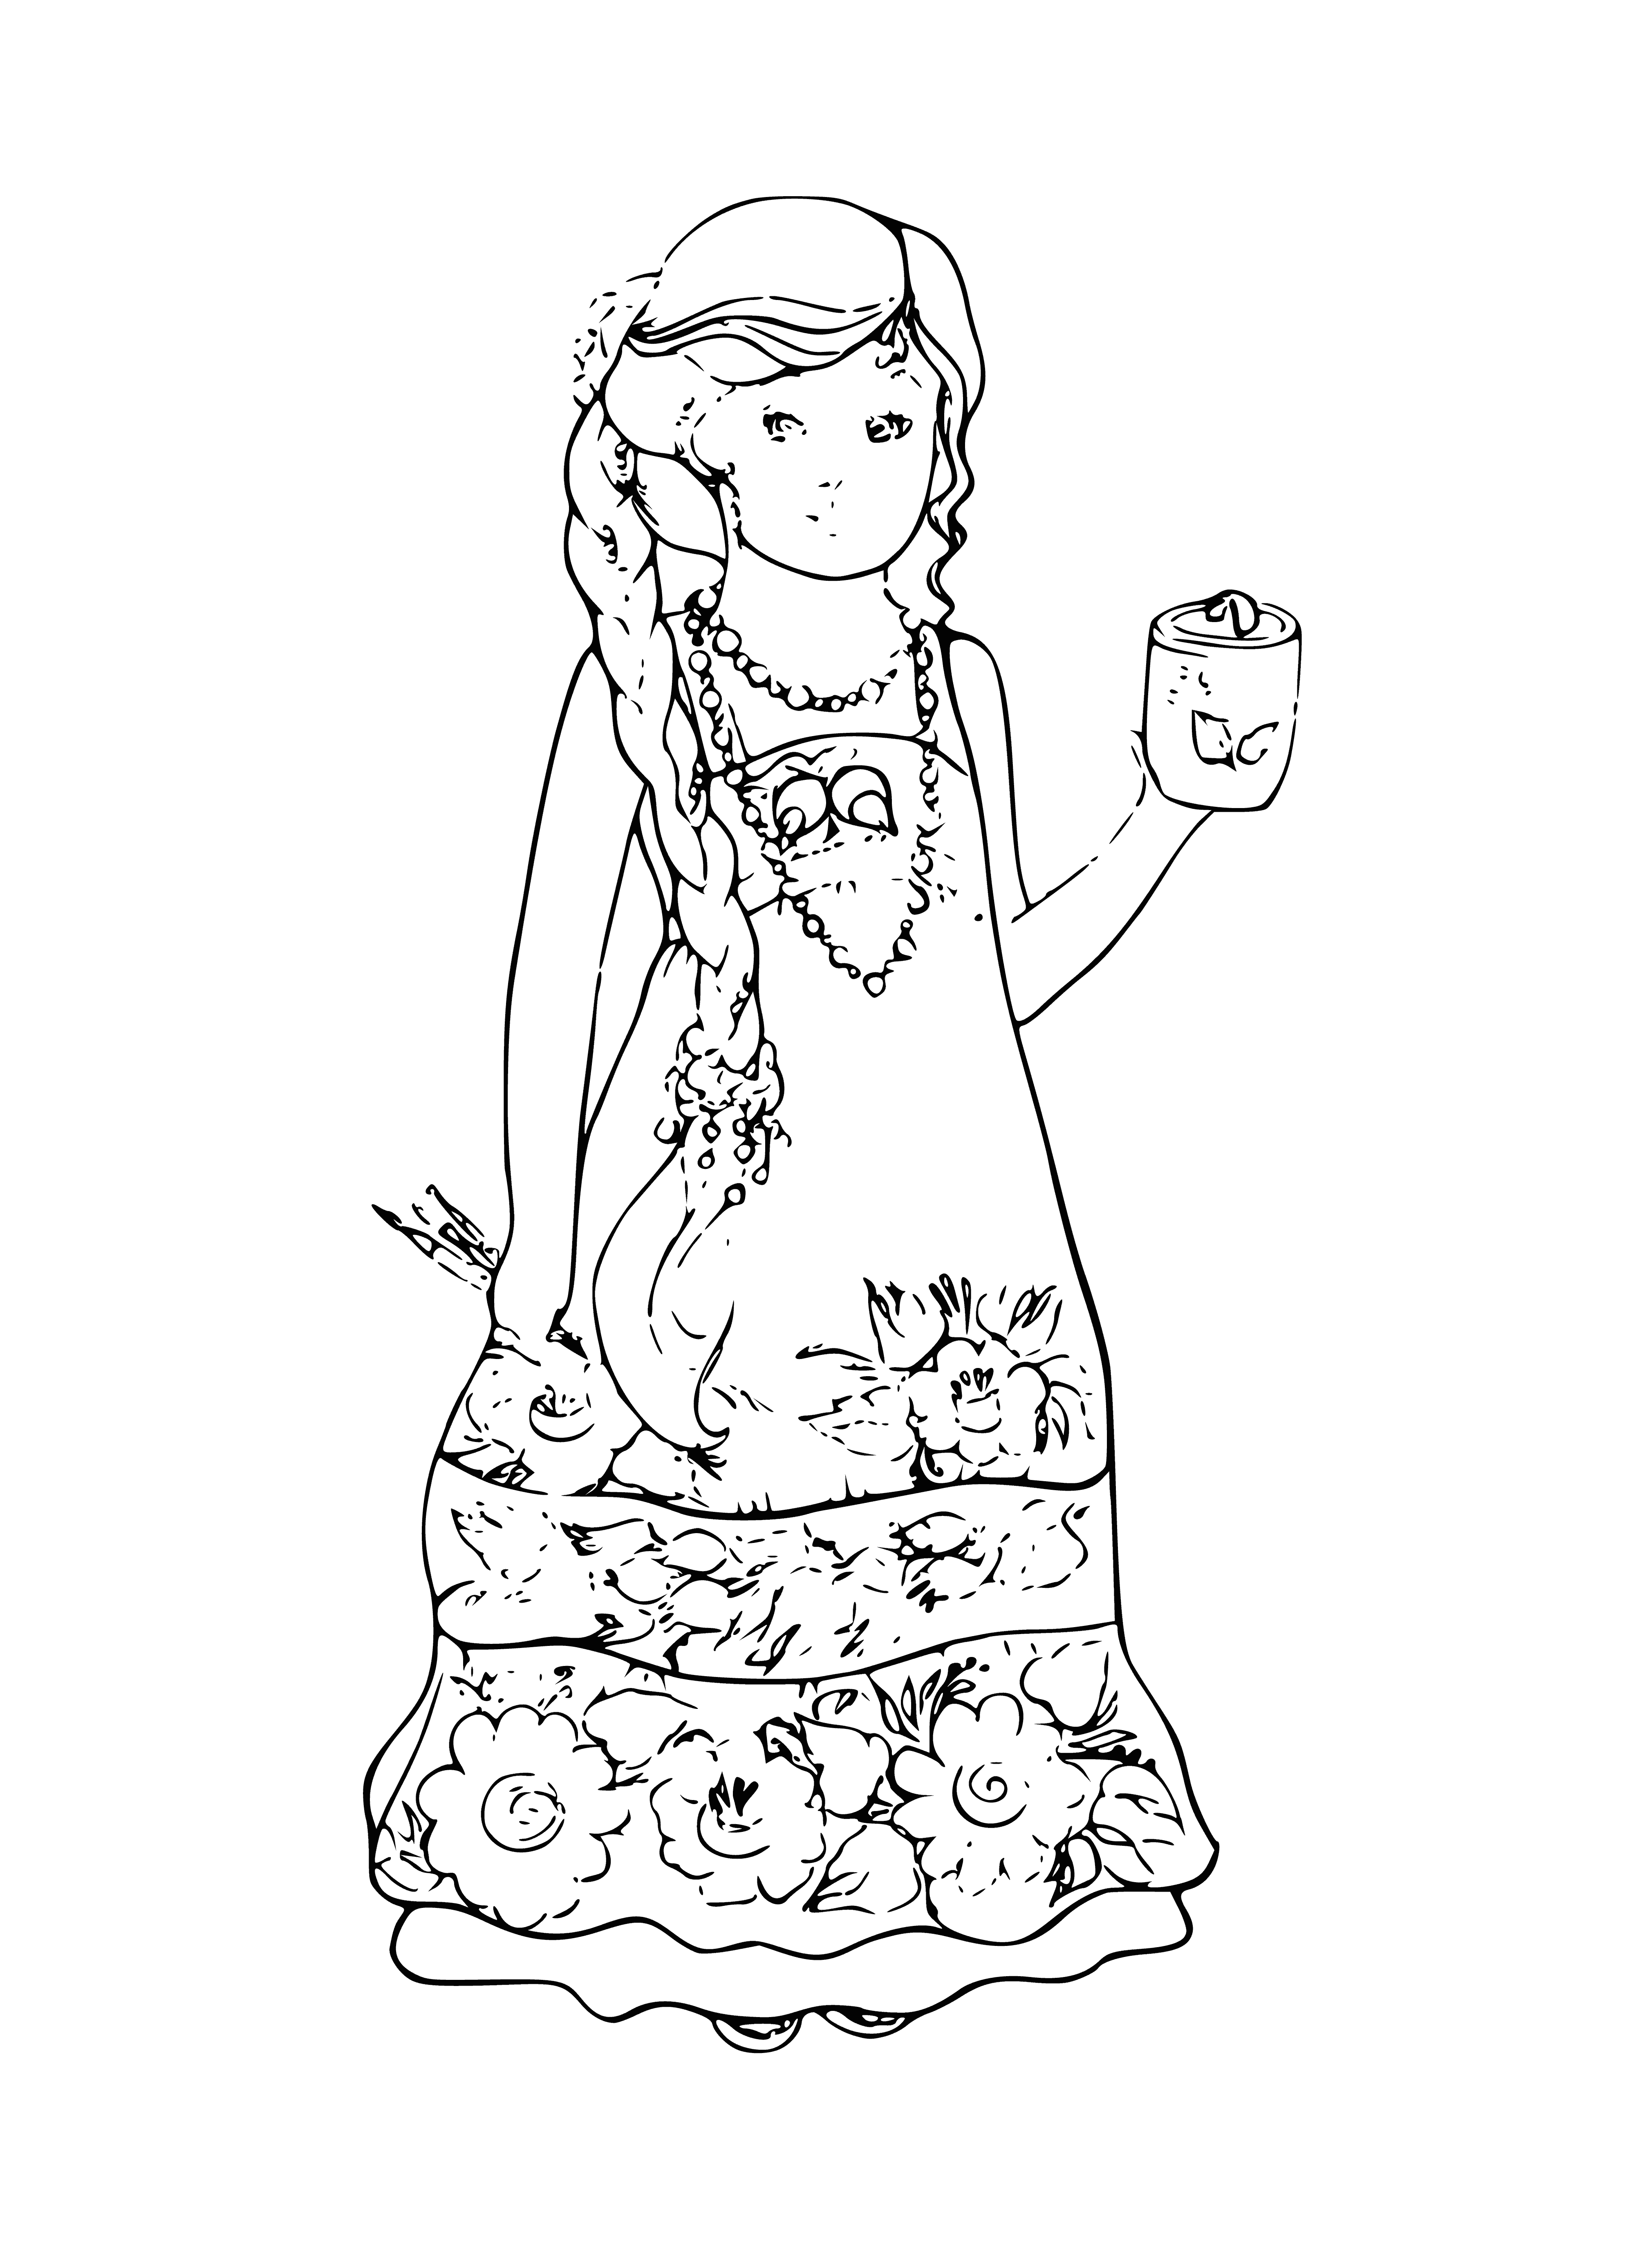 coloring page: Woman from Ural-Siberian region wears patterned dress, headscarf and looks towards background of mountains and trees. #Russia #Culture